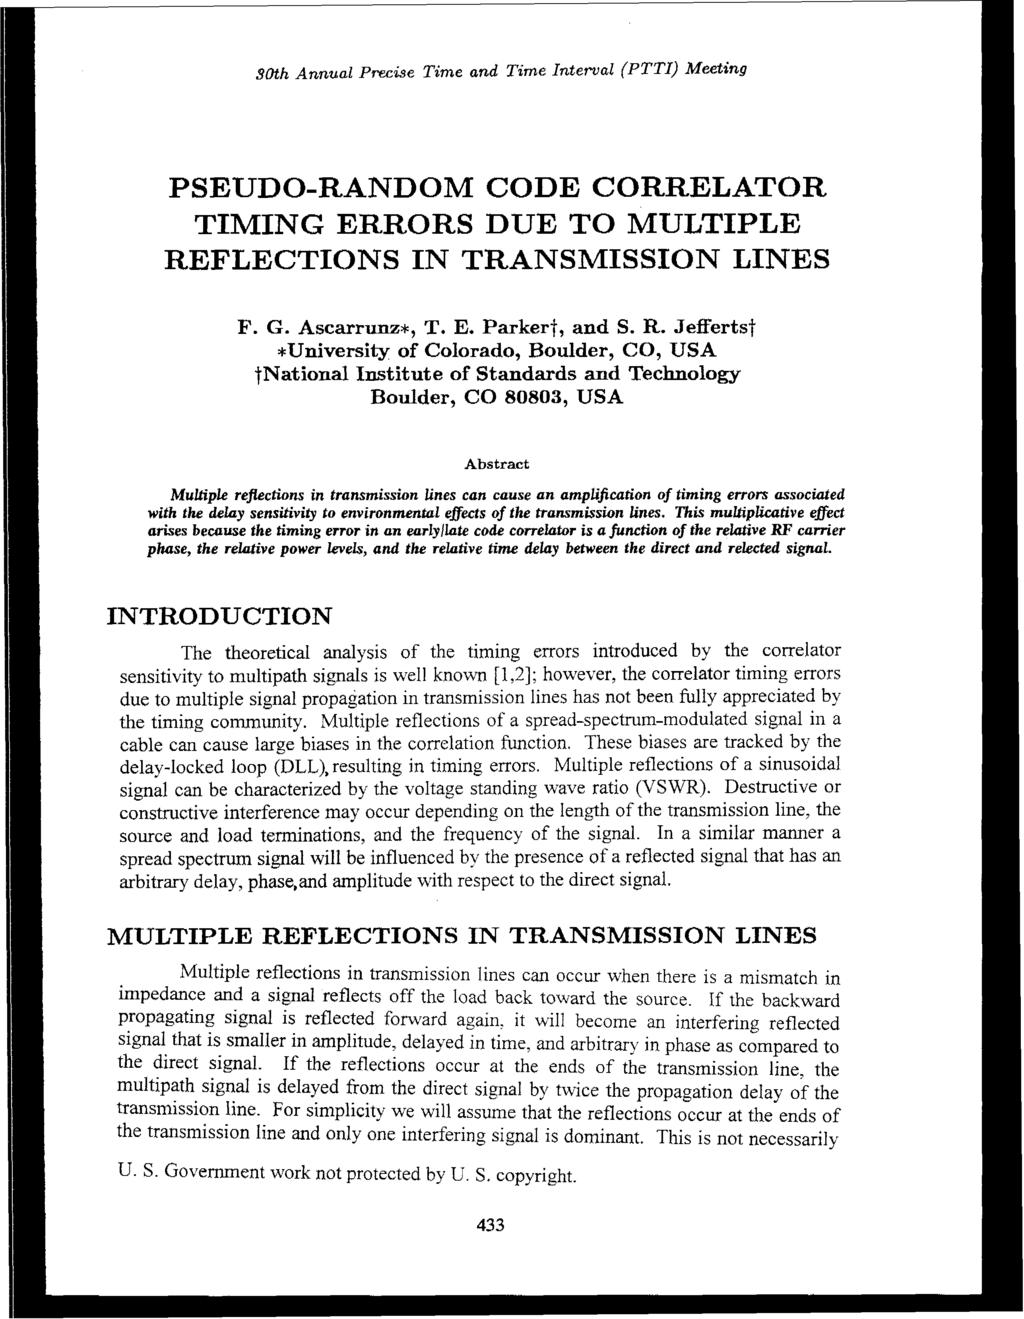 30th Annual Precise Time and Time Interval (PTTI) Meeting PSEUDO-RANDOM CODE CORRELATOR TIMING ERRORS DUE TO MULTIPLE RE